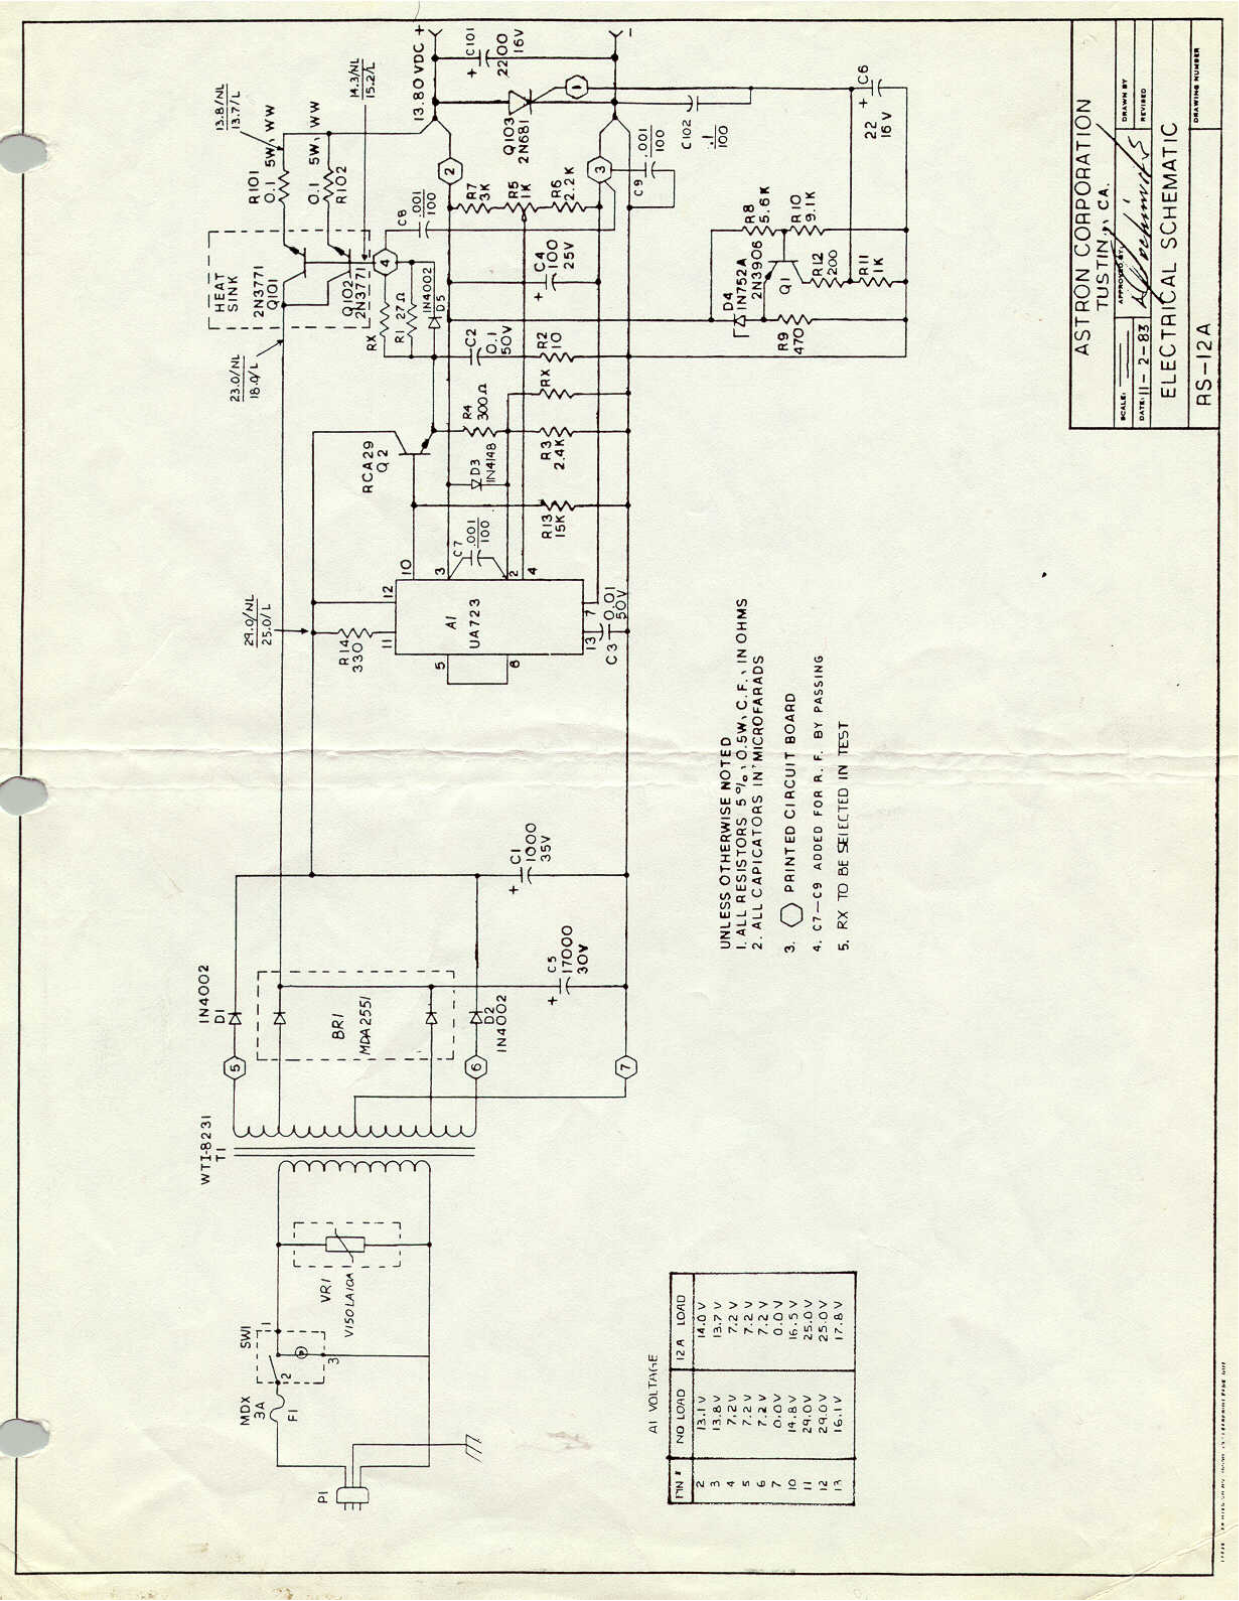 Astron rs12a schematic